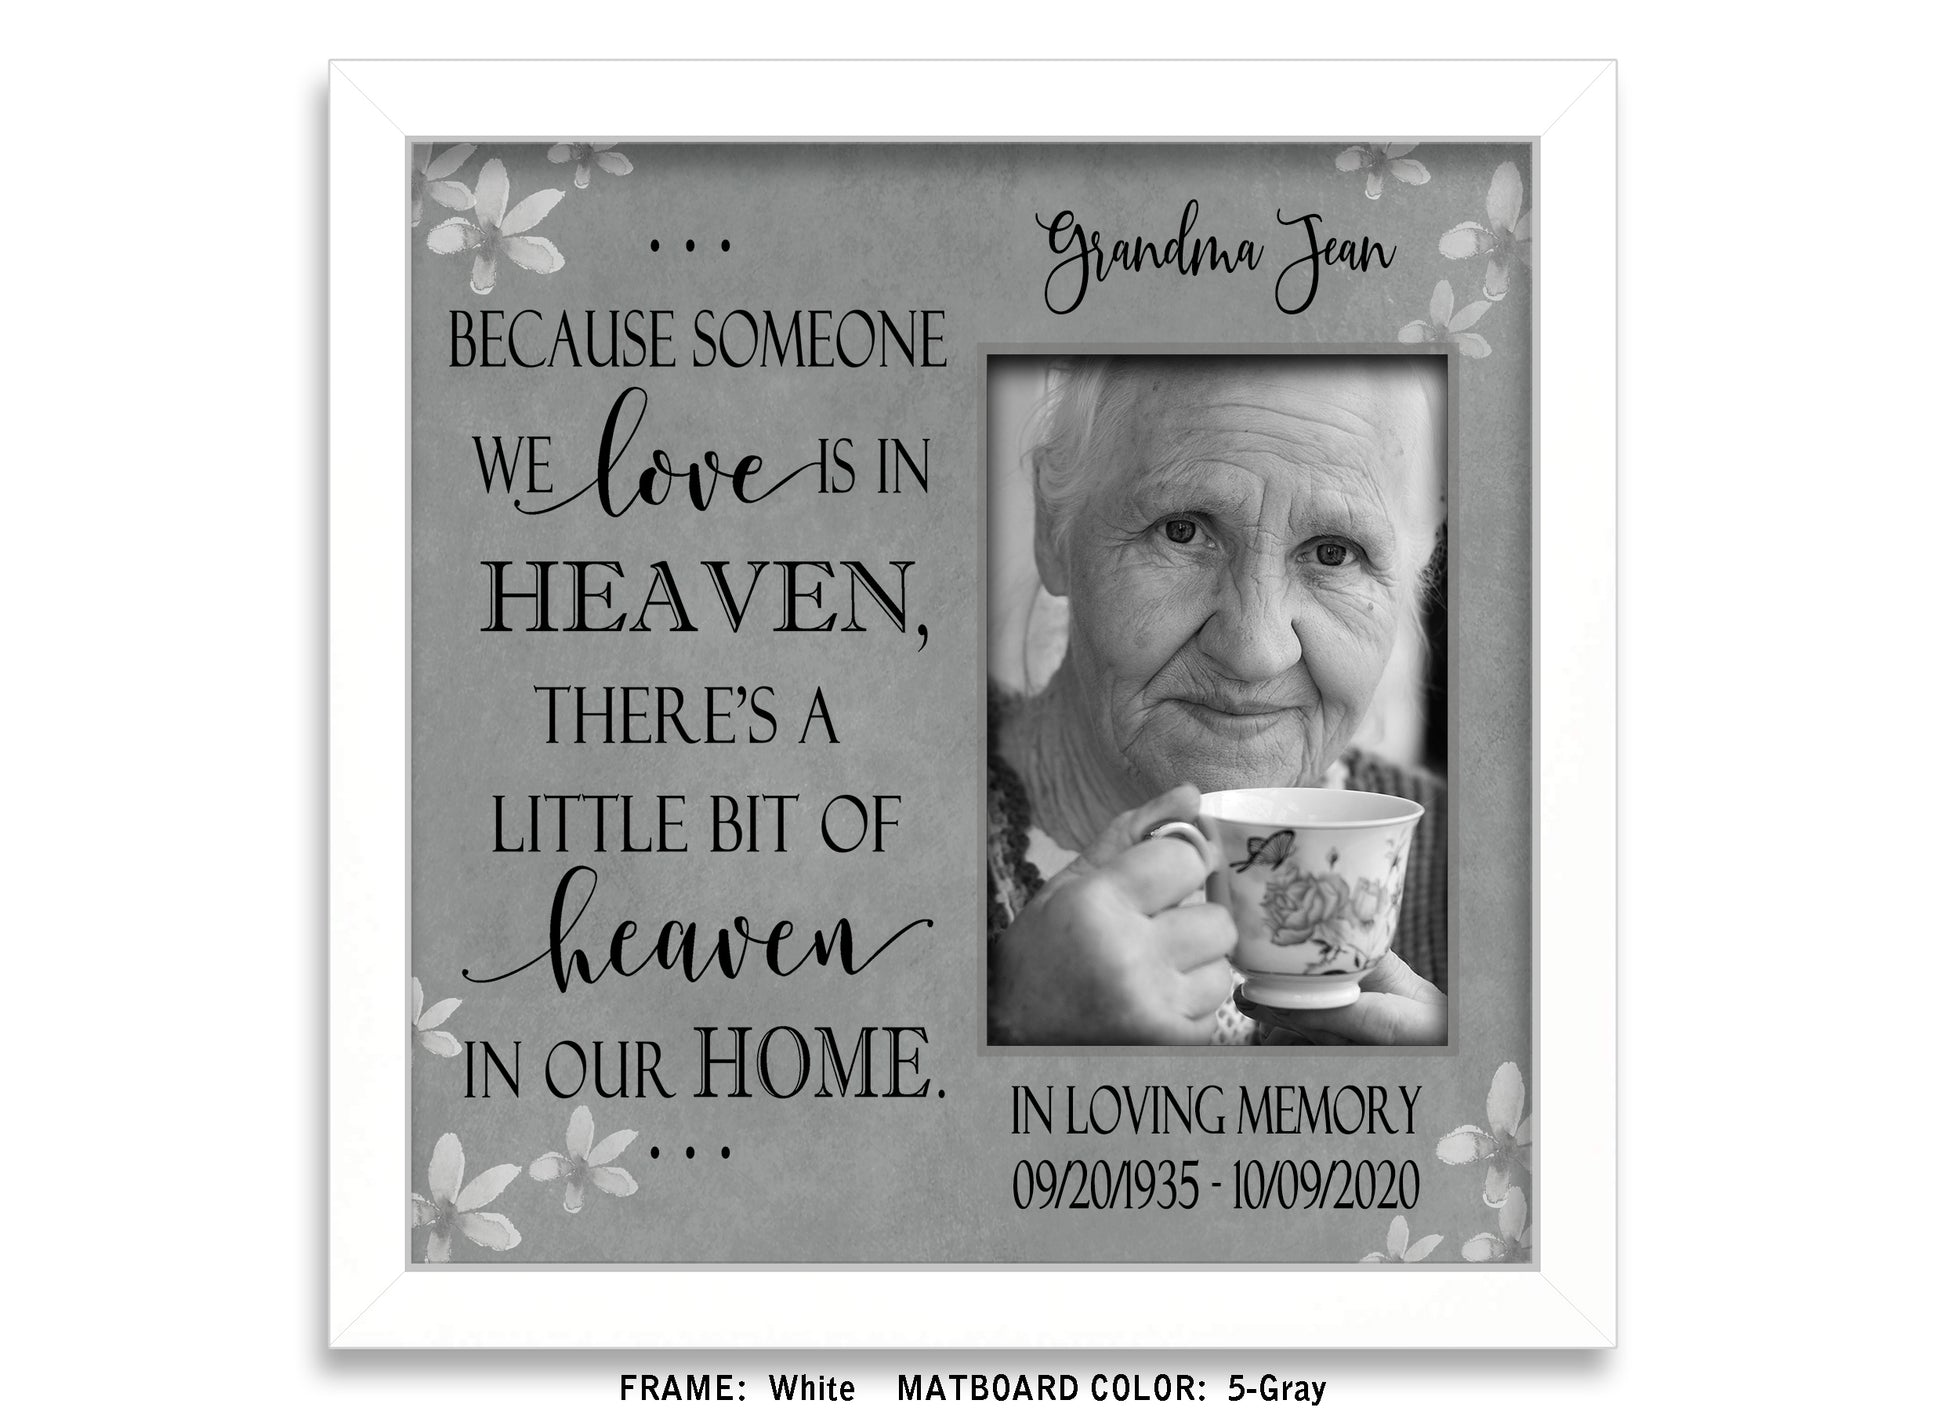 Because Someone We Love Is in Heaven Personalized Bereavement Gifts, 10x10 Picture Frame MatboardMemories   